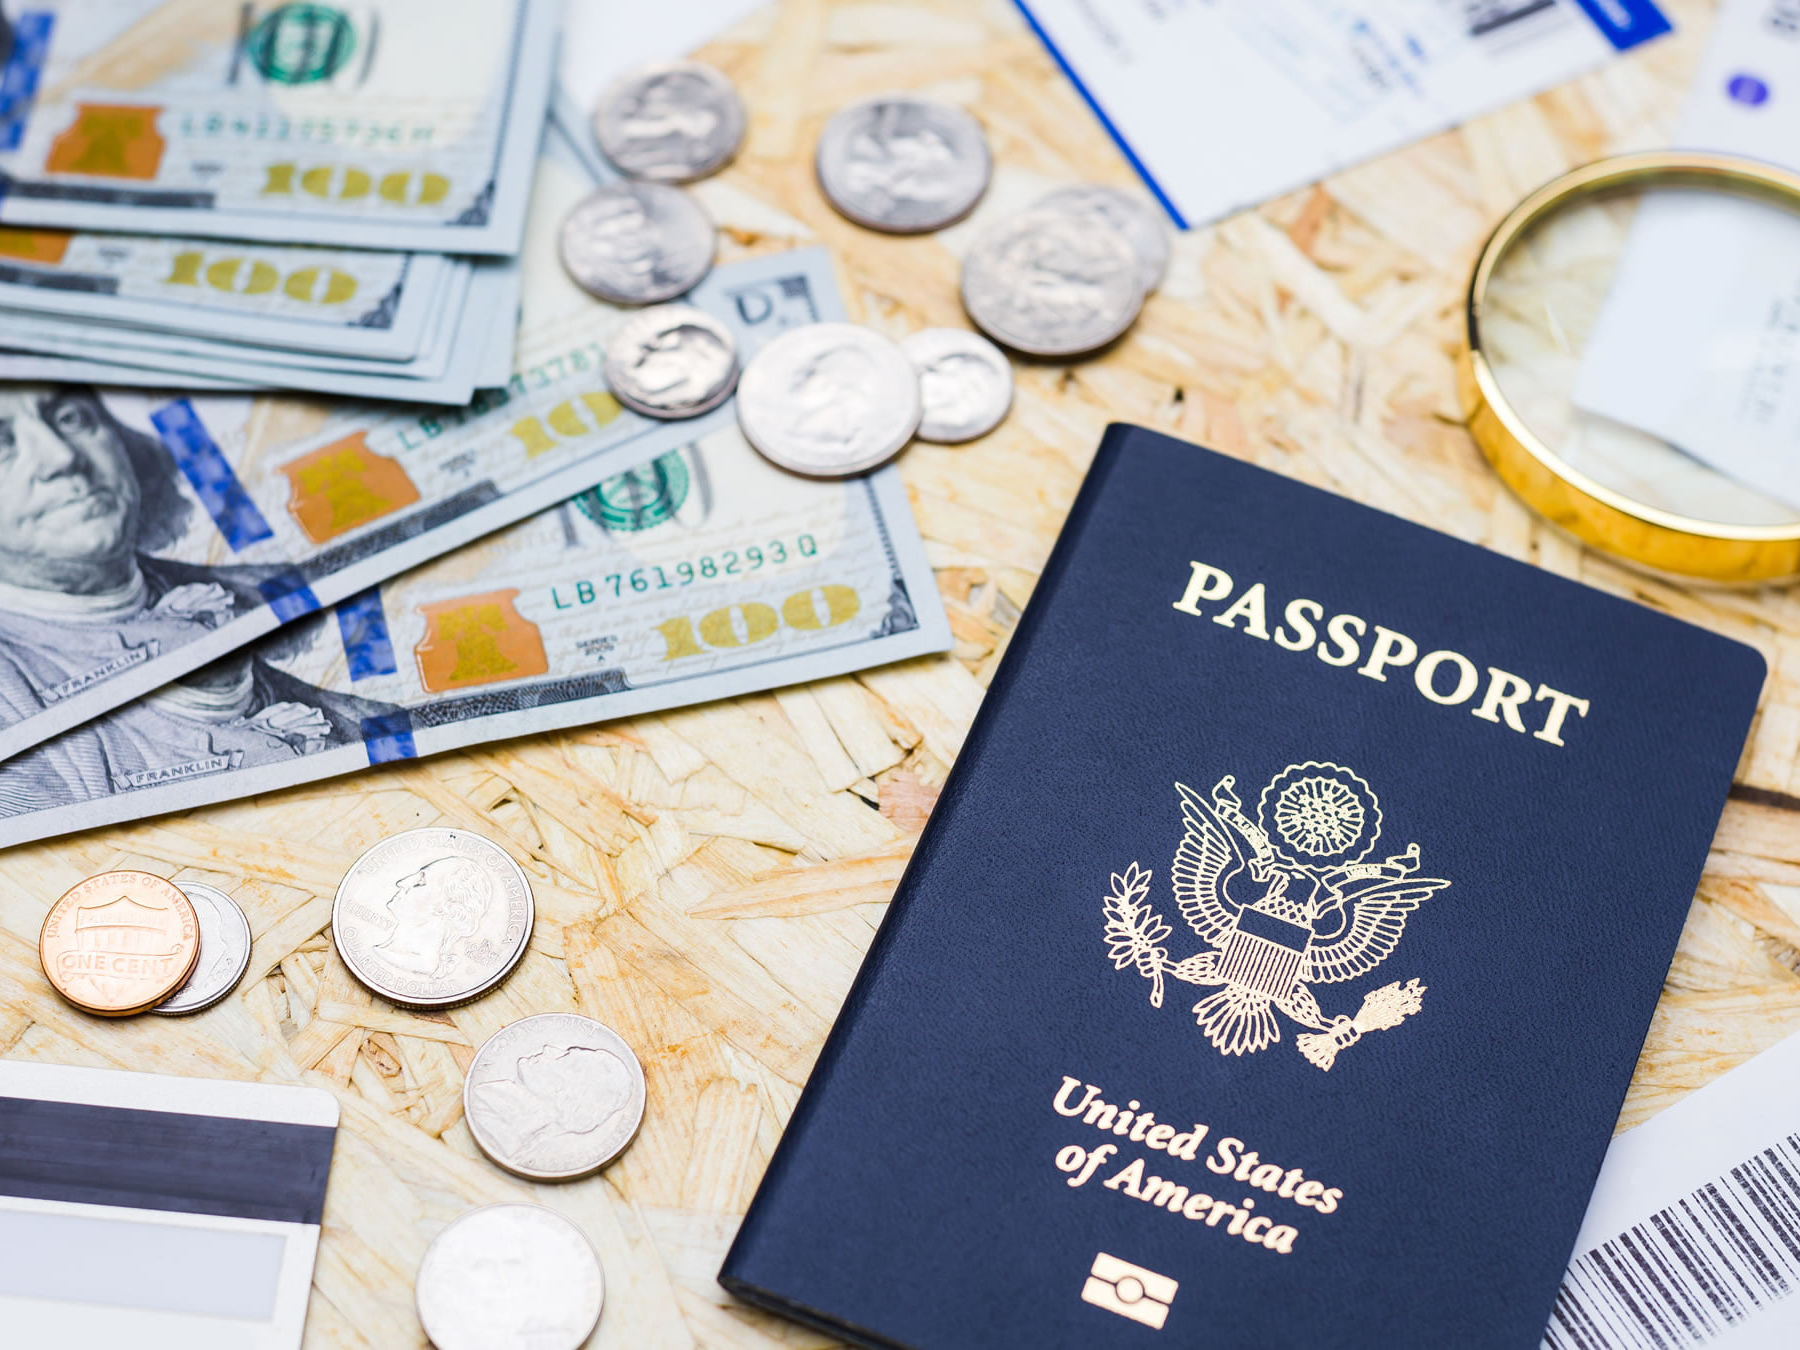 Things Not to Do During The USA Trip for UAE Residents - Don't forget your necessary travel documentation